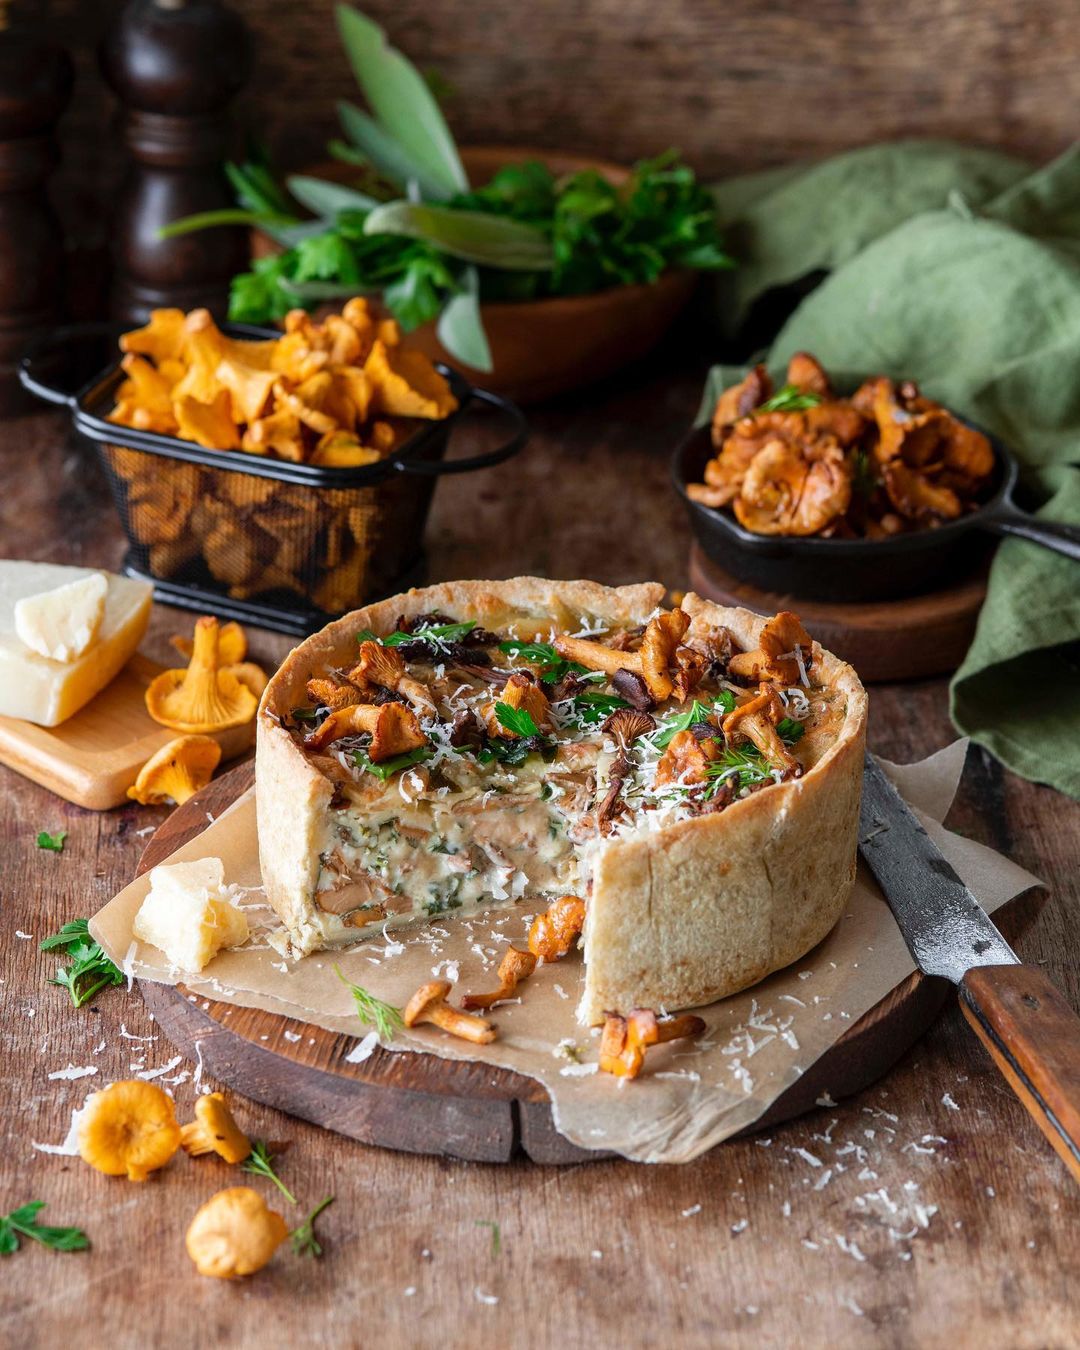 Chanterelle mushrooms pie with cheese and herbs